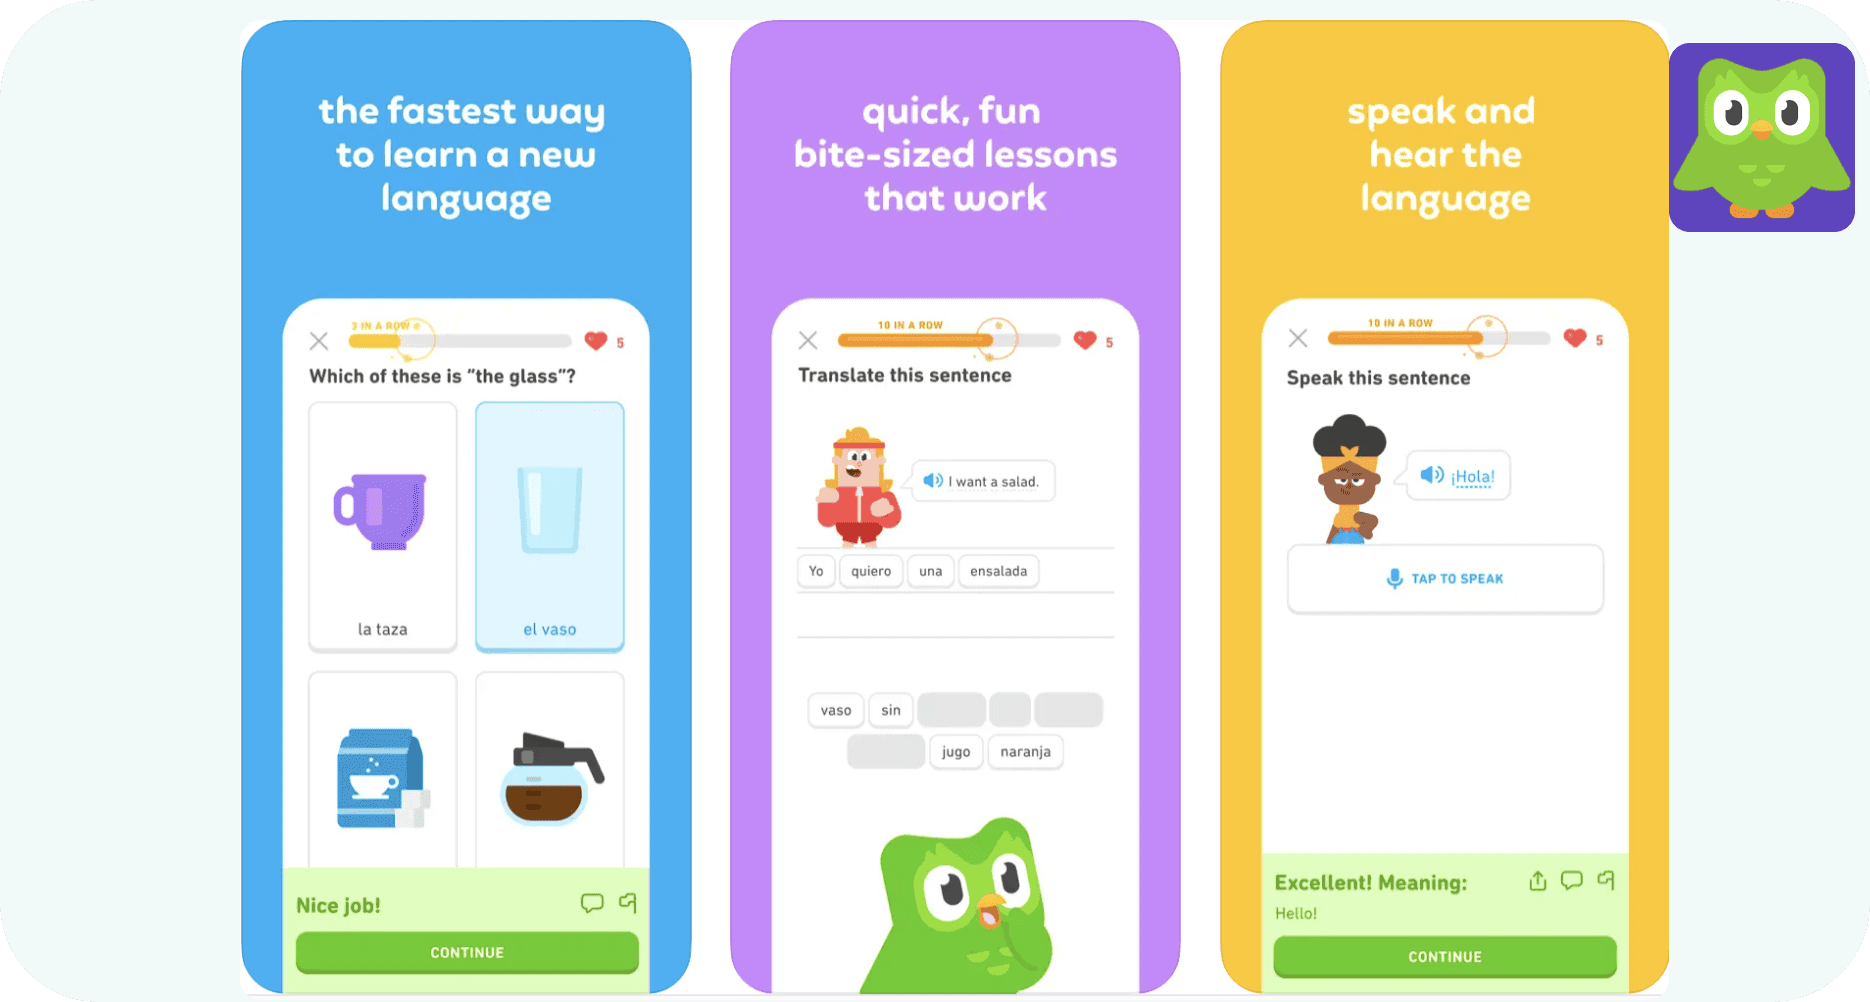 App screenshots from AppStore for Duolingo featuring self improvement features